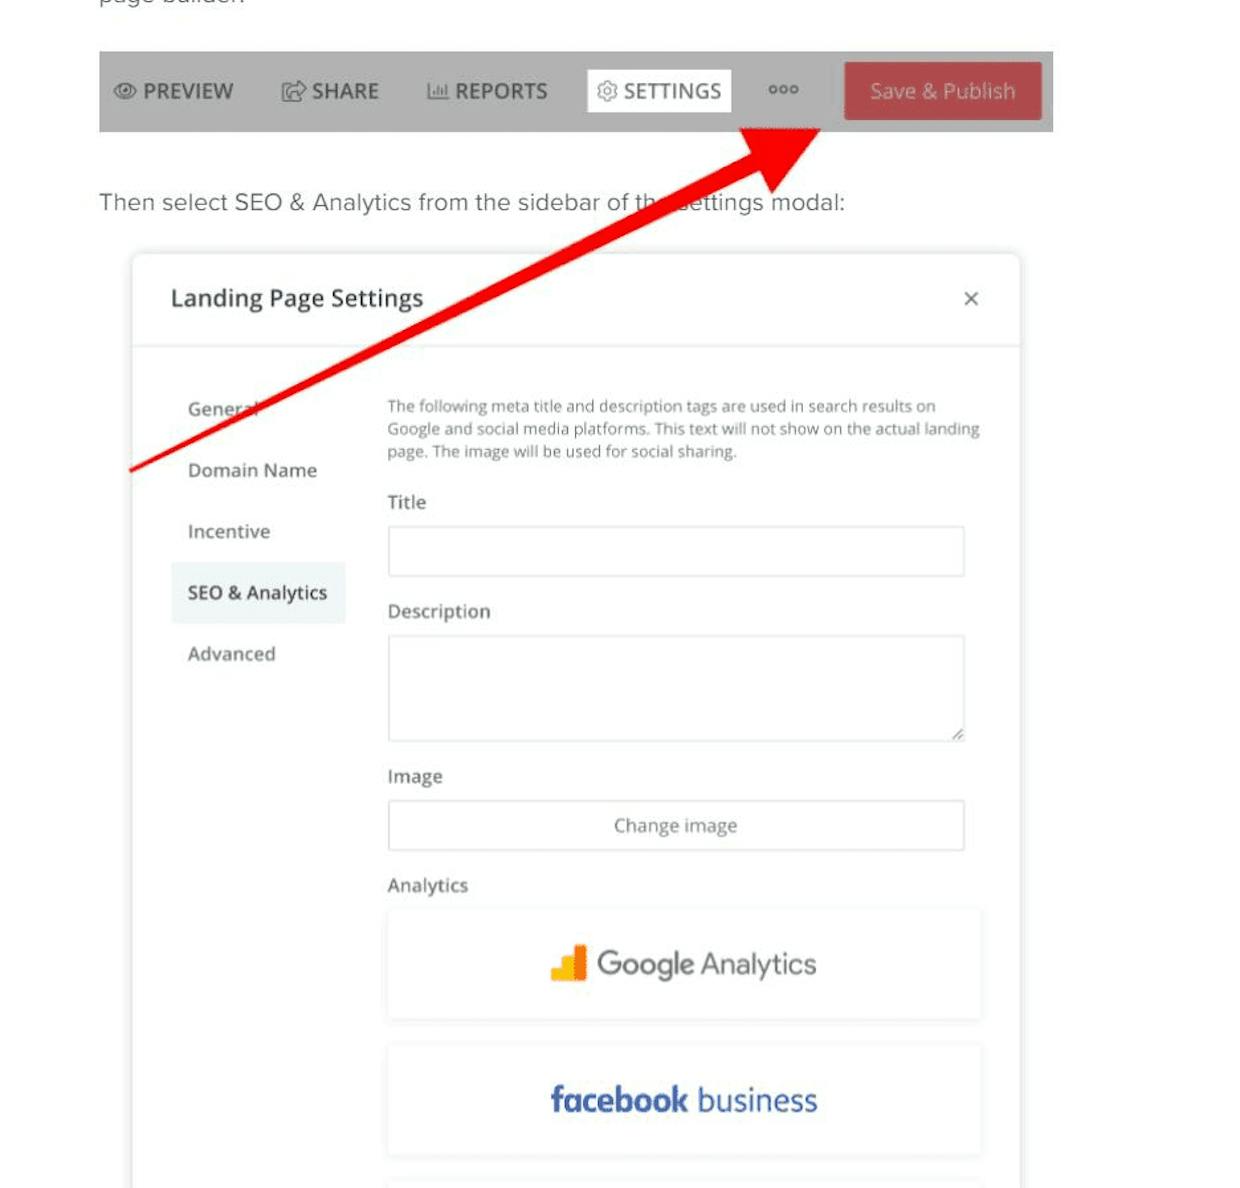 How do I get my page's image to show up when I link it in a post or use it in my linkedin featured section? I added a photo in settings > seo and waited several hours.